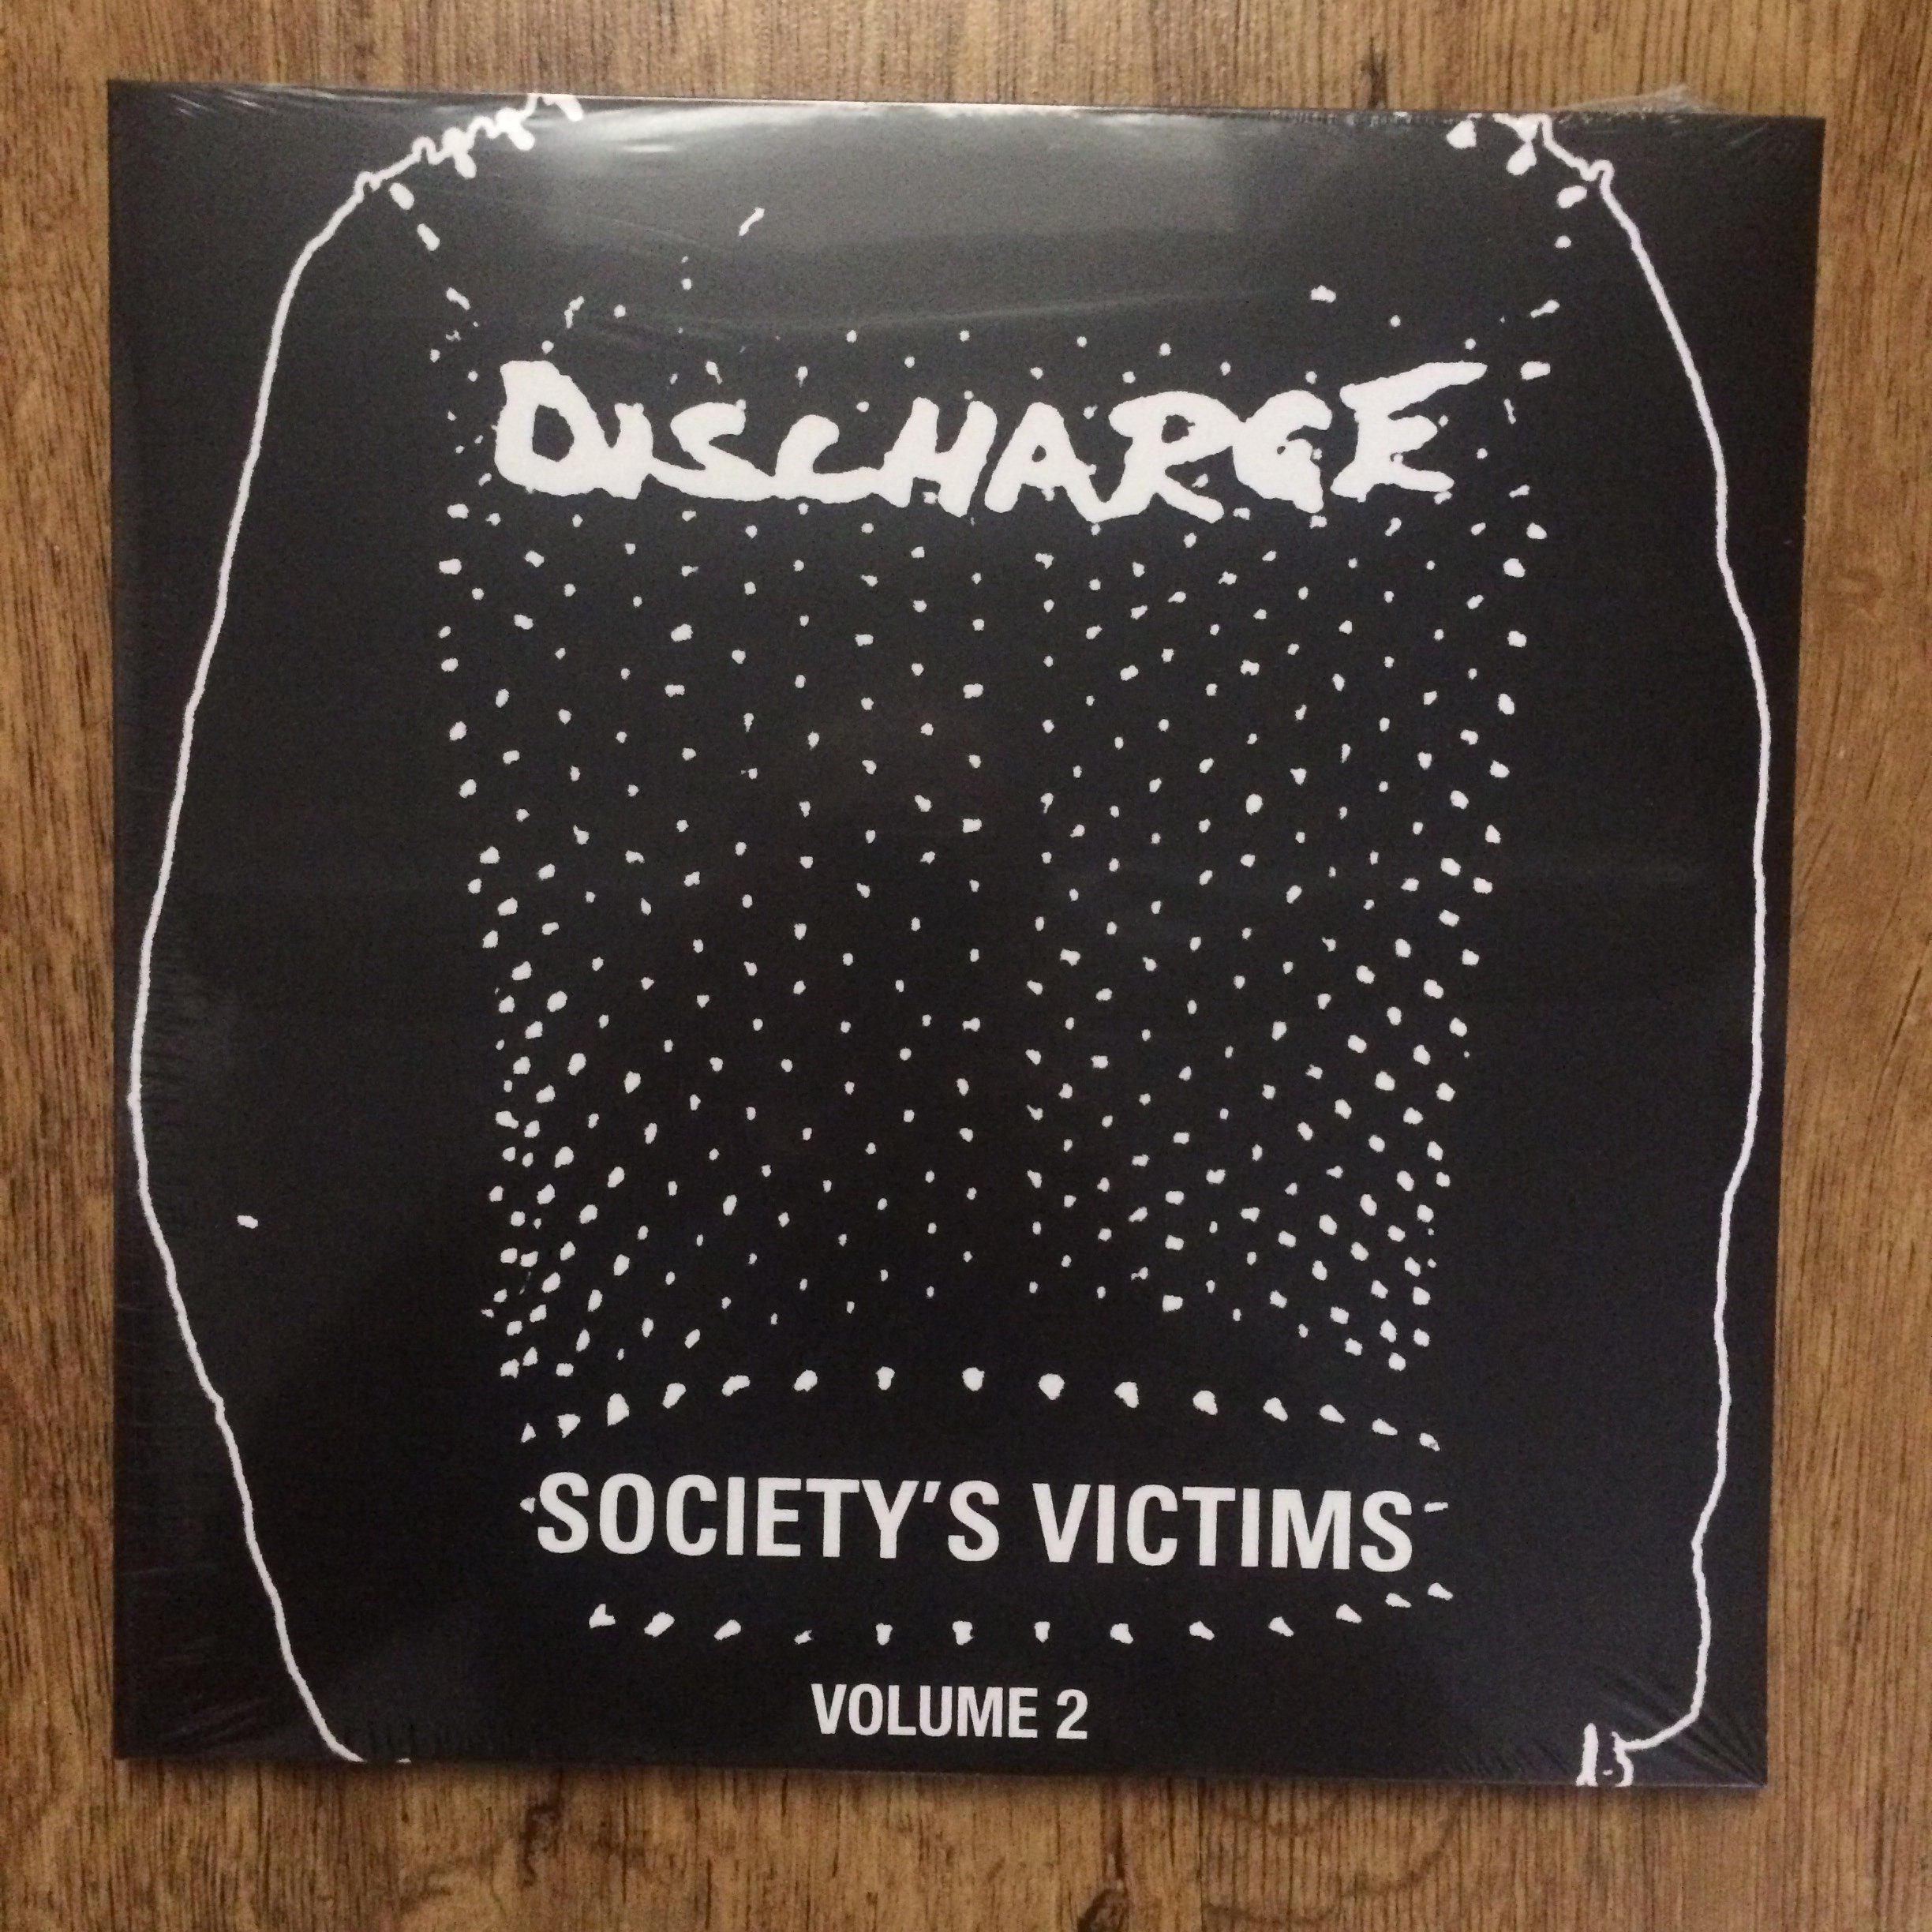 Photo of the Discharge - "Society's Victims - Vol. 2" 2LP